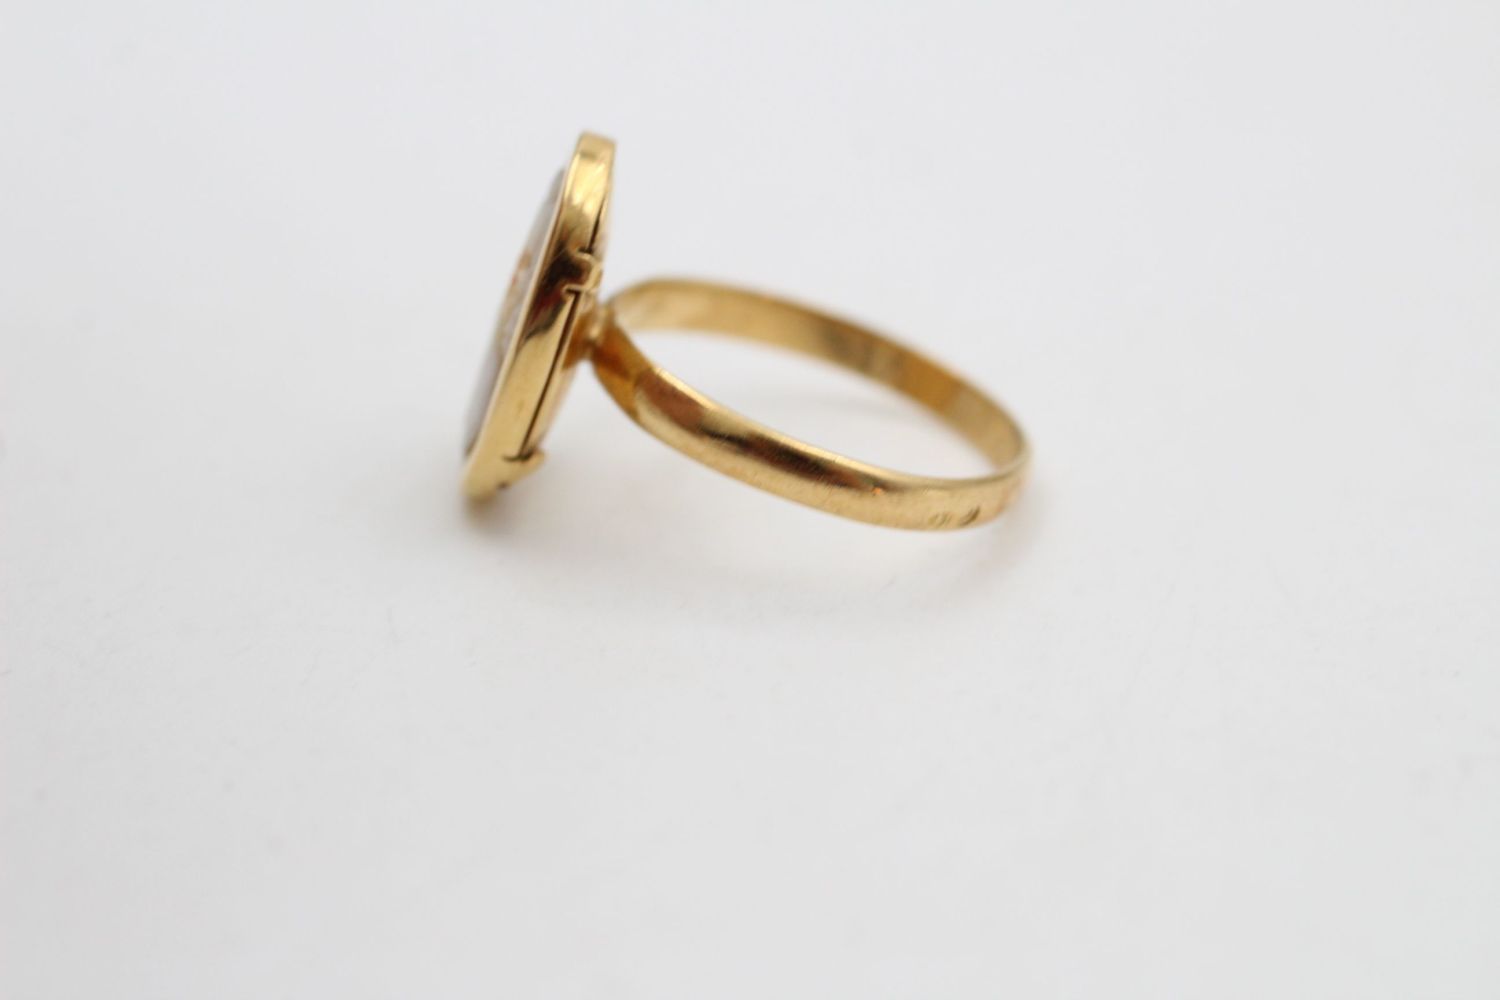 18ct Gold frame shell cameo ring 2.2 grams gross - Image 3 of 4